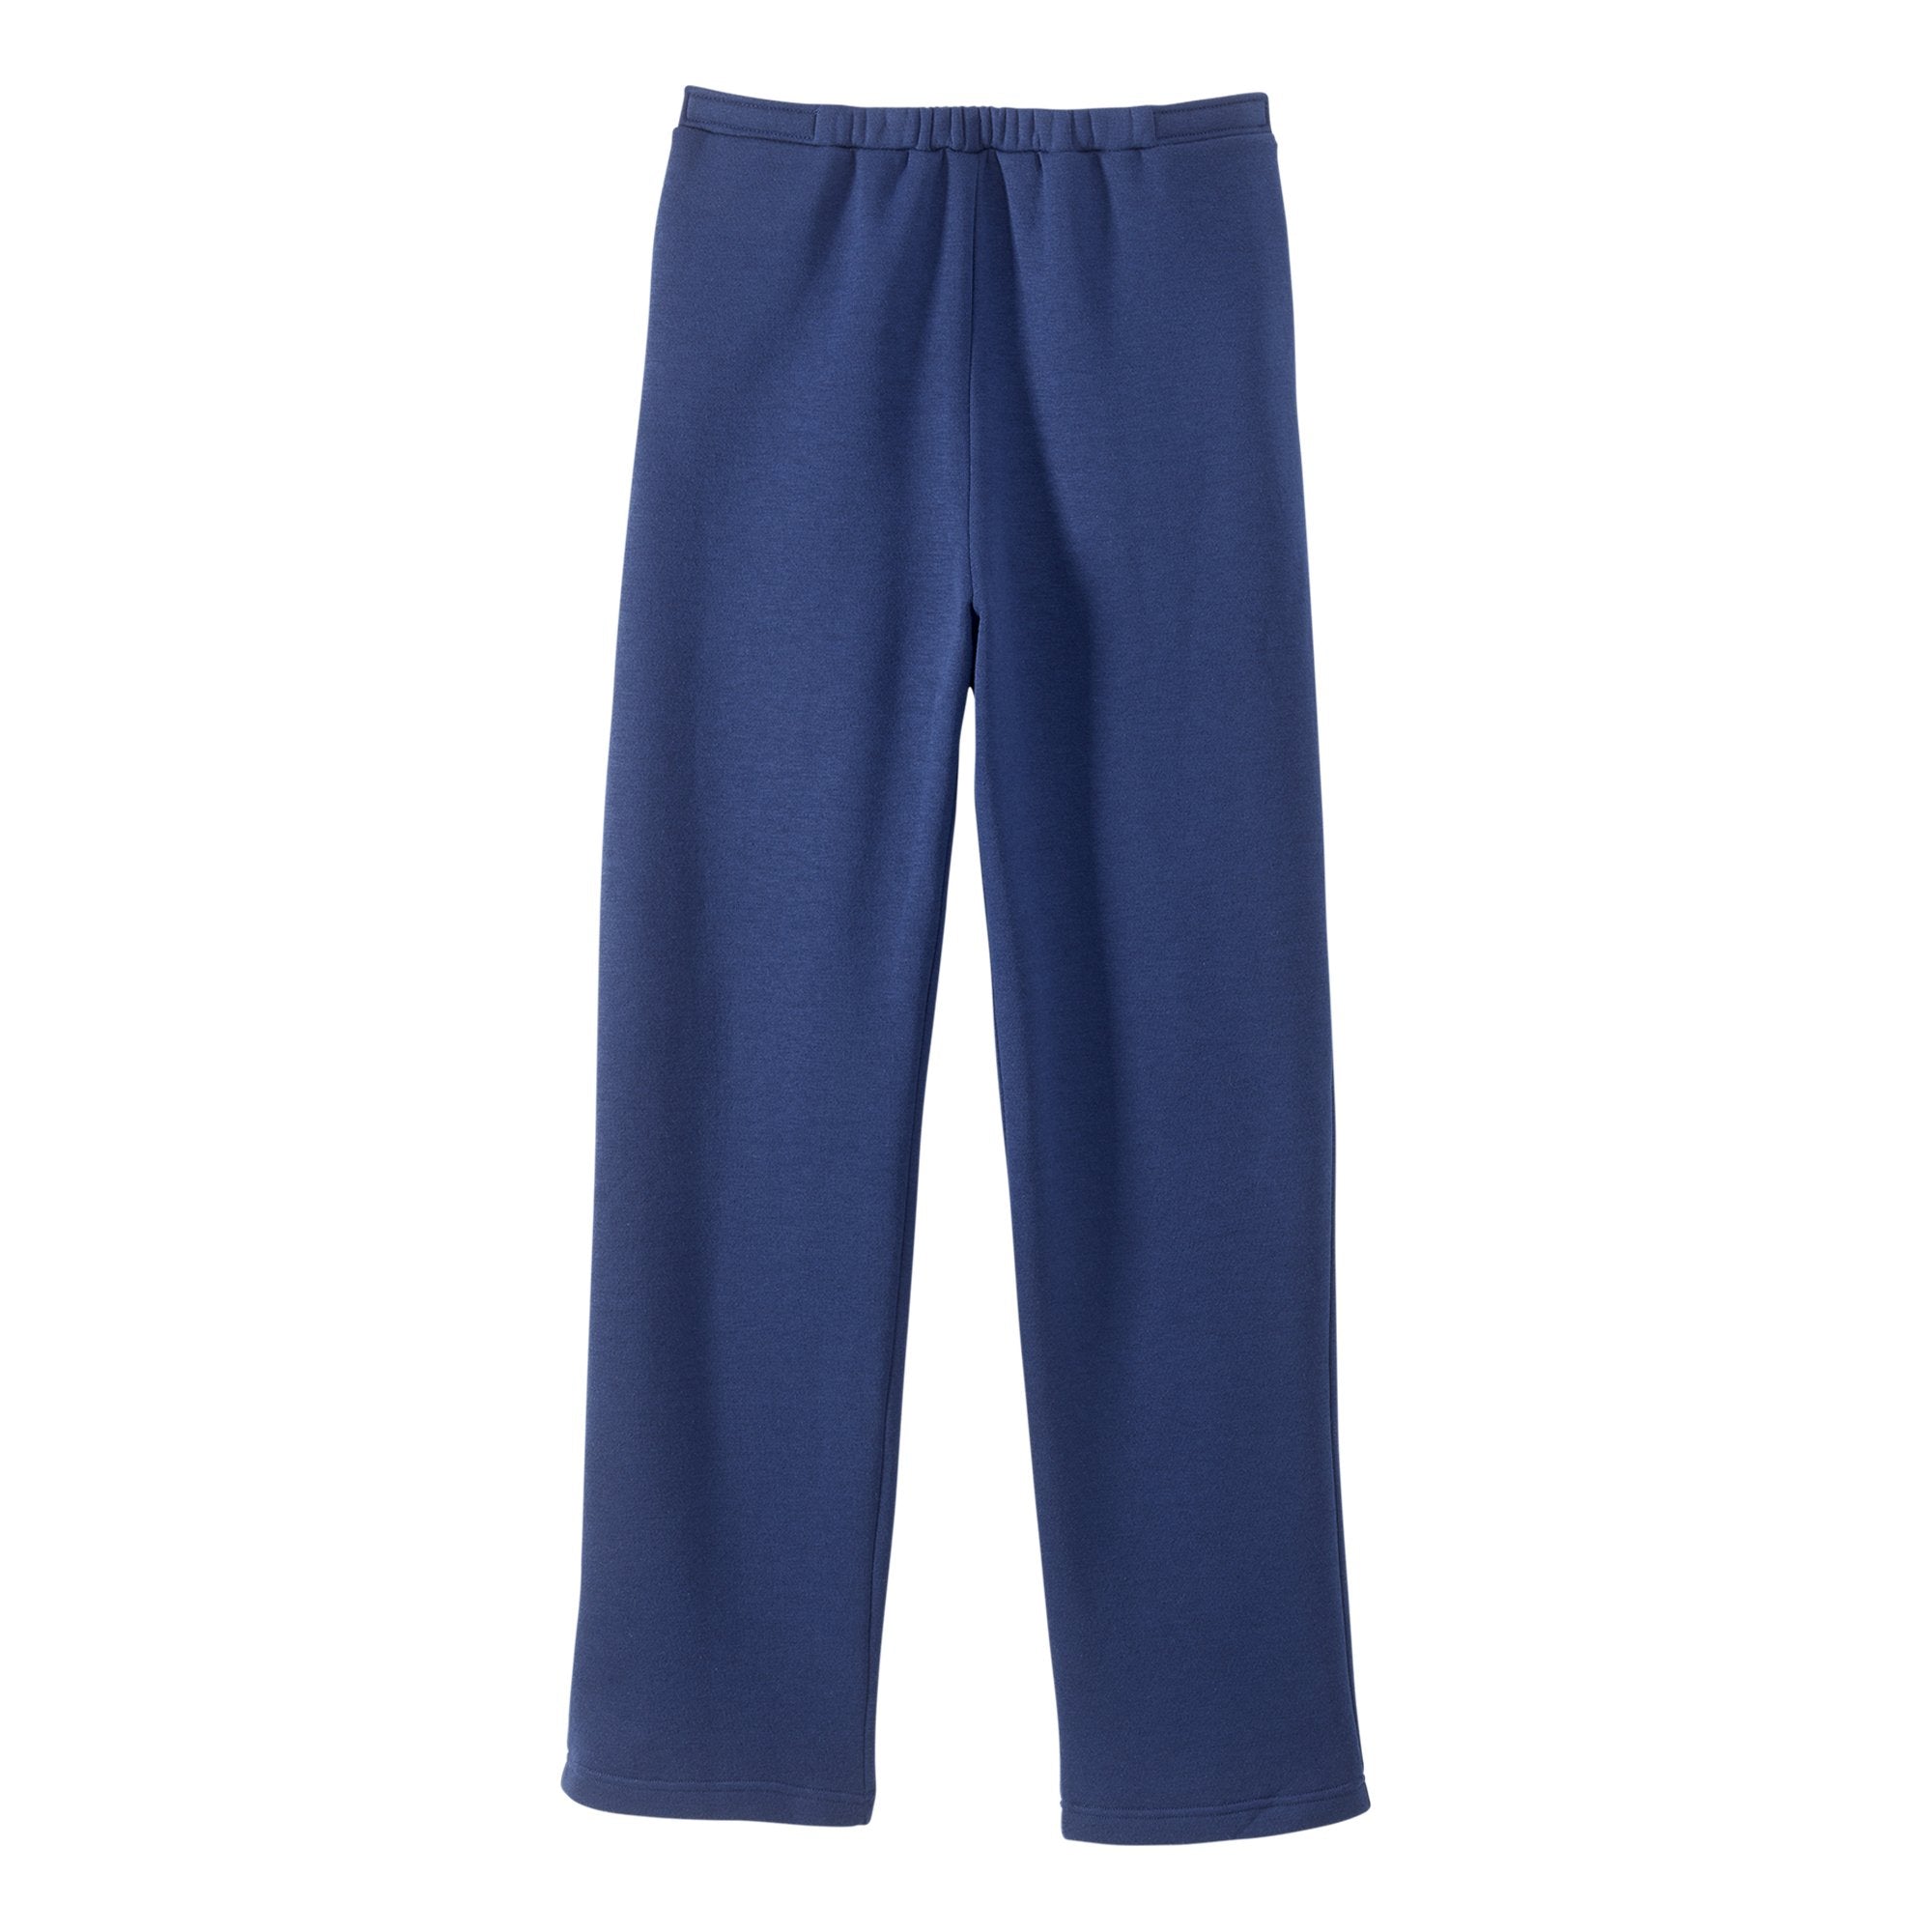 PANTS, TRACK WMNS OPEN SIDE NAVY LG